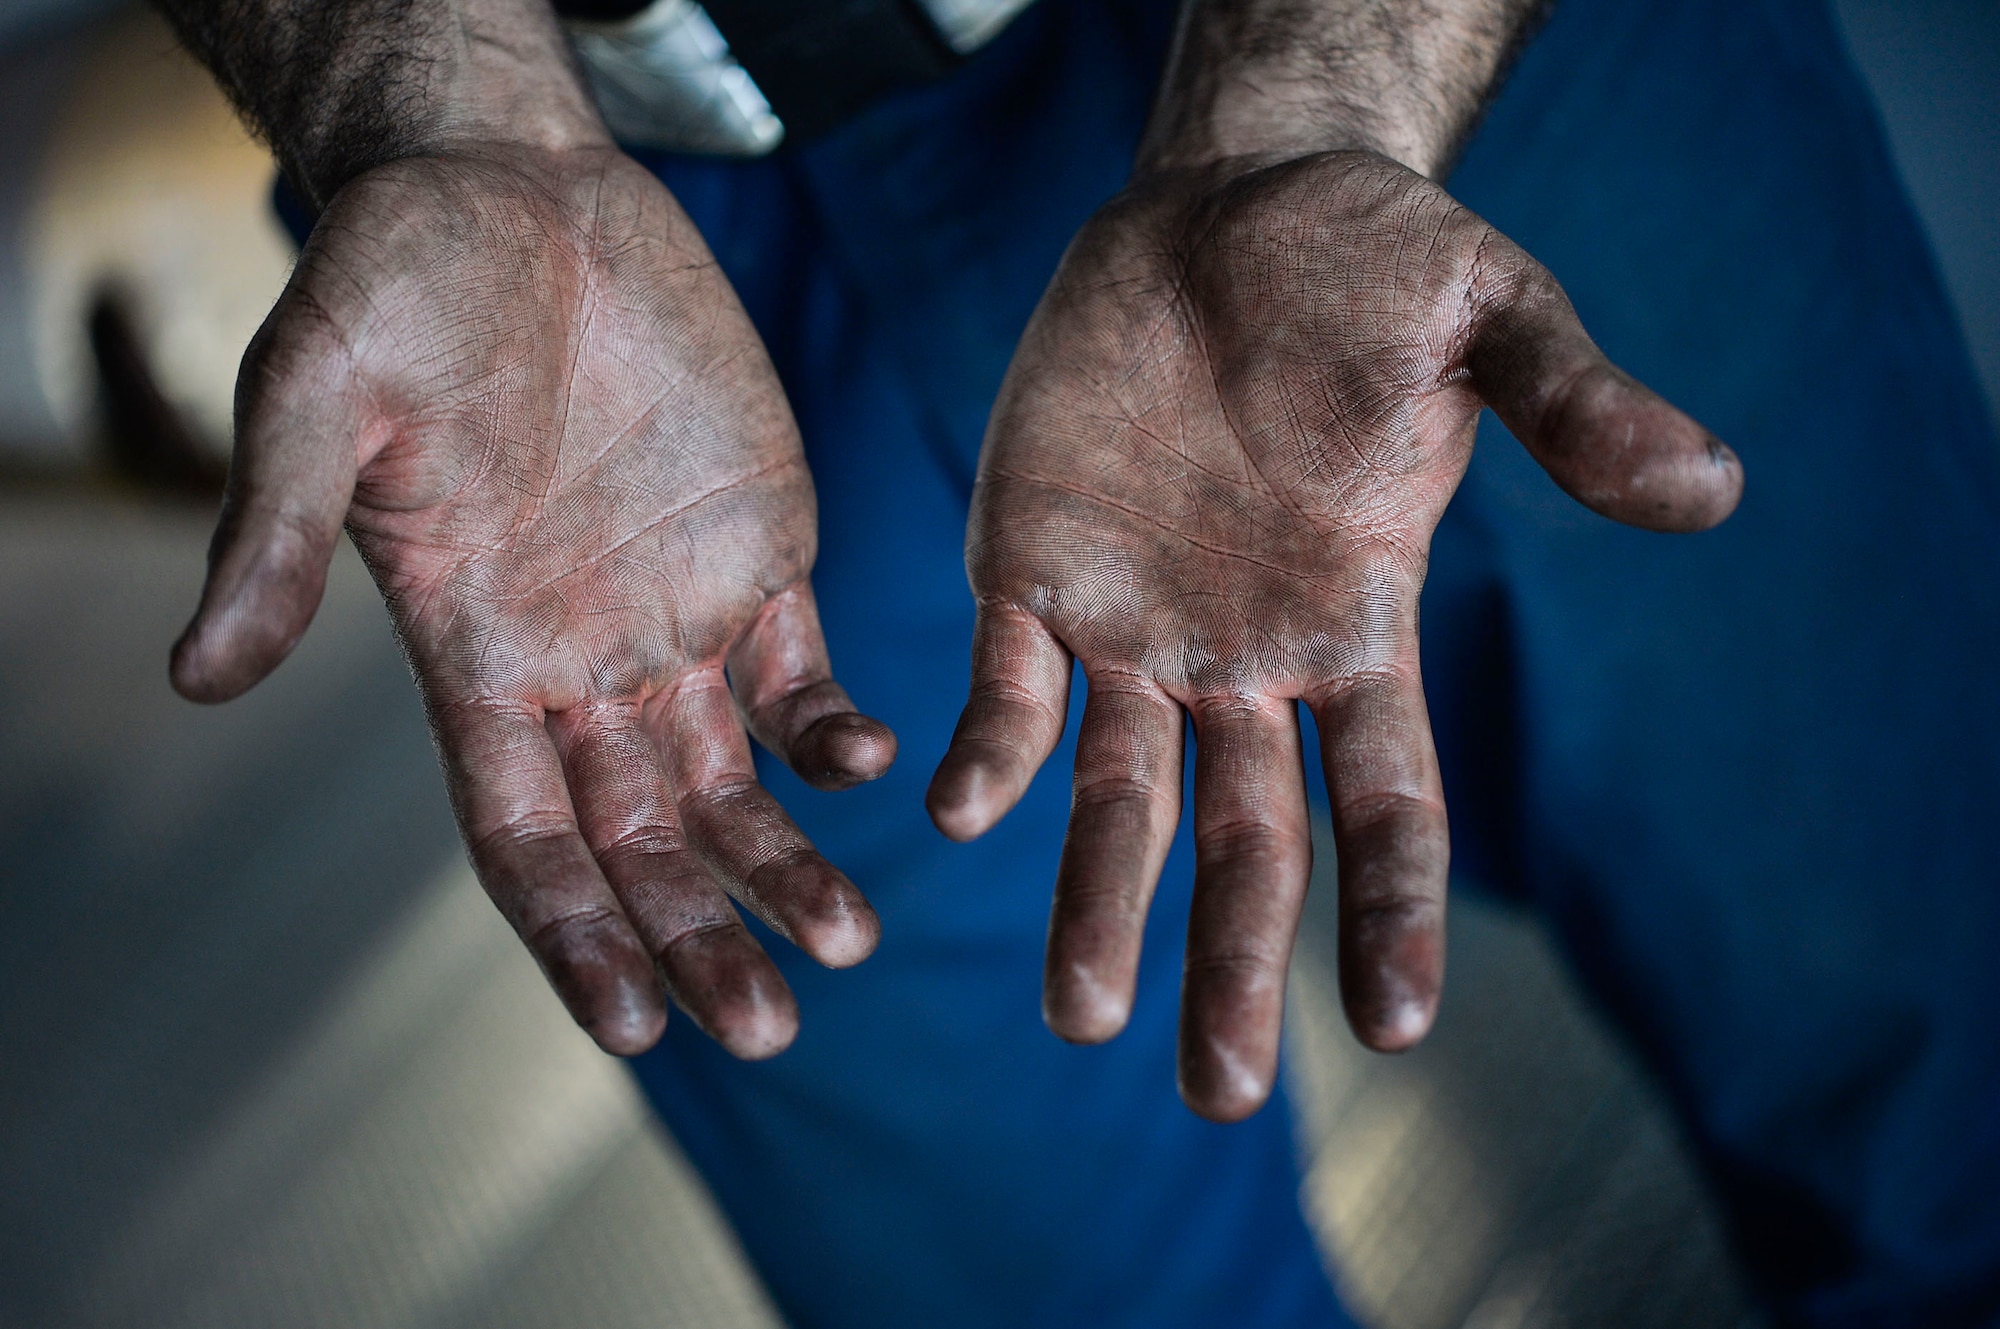 U.S. Air Force Senior Airman Johann Caballero, 86th Maintenance Squadron aerospace propulsion journeyman, shows oil on his hands as the result of conducting maintenance on the engine of a C-130J Super Hercules on Ramstein Air Base, Germany, April 10, 2018. Air Force maintainers are considered mission essential, and are responsible for ensuring the reliability and operational readiness of aircraft. (U.S. Air Force photo by Senior Airman Joshua Magbanua)